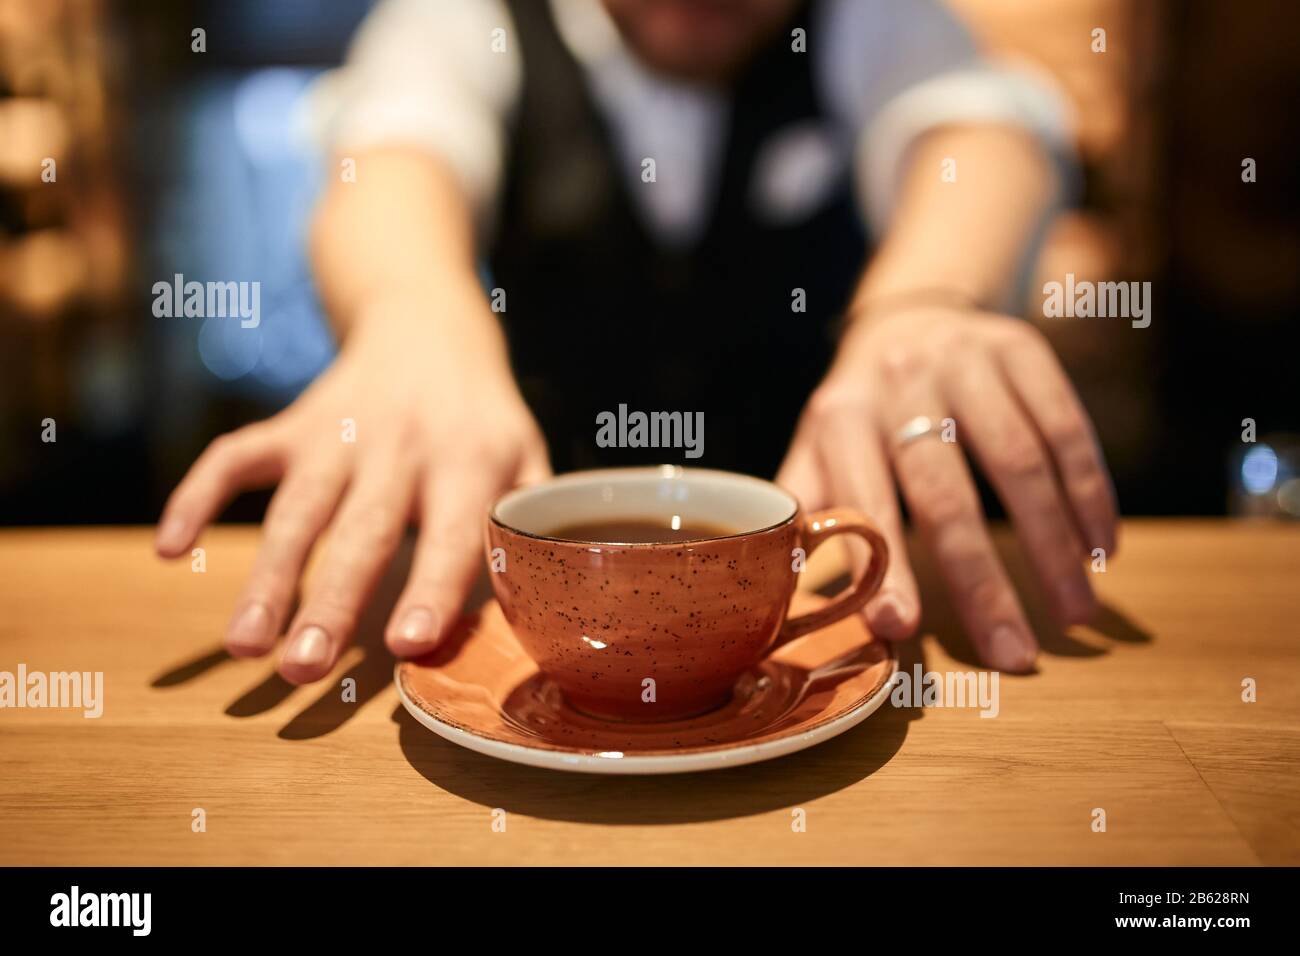 black coffee in orange cup on brown wooden table blurred background.sale discount . close up cropped photo Stock Photo